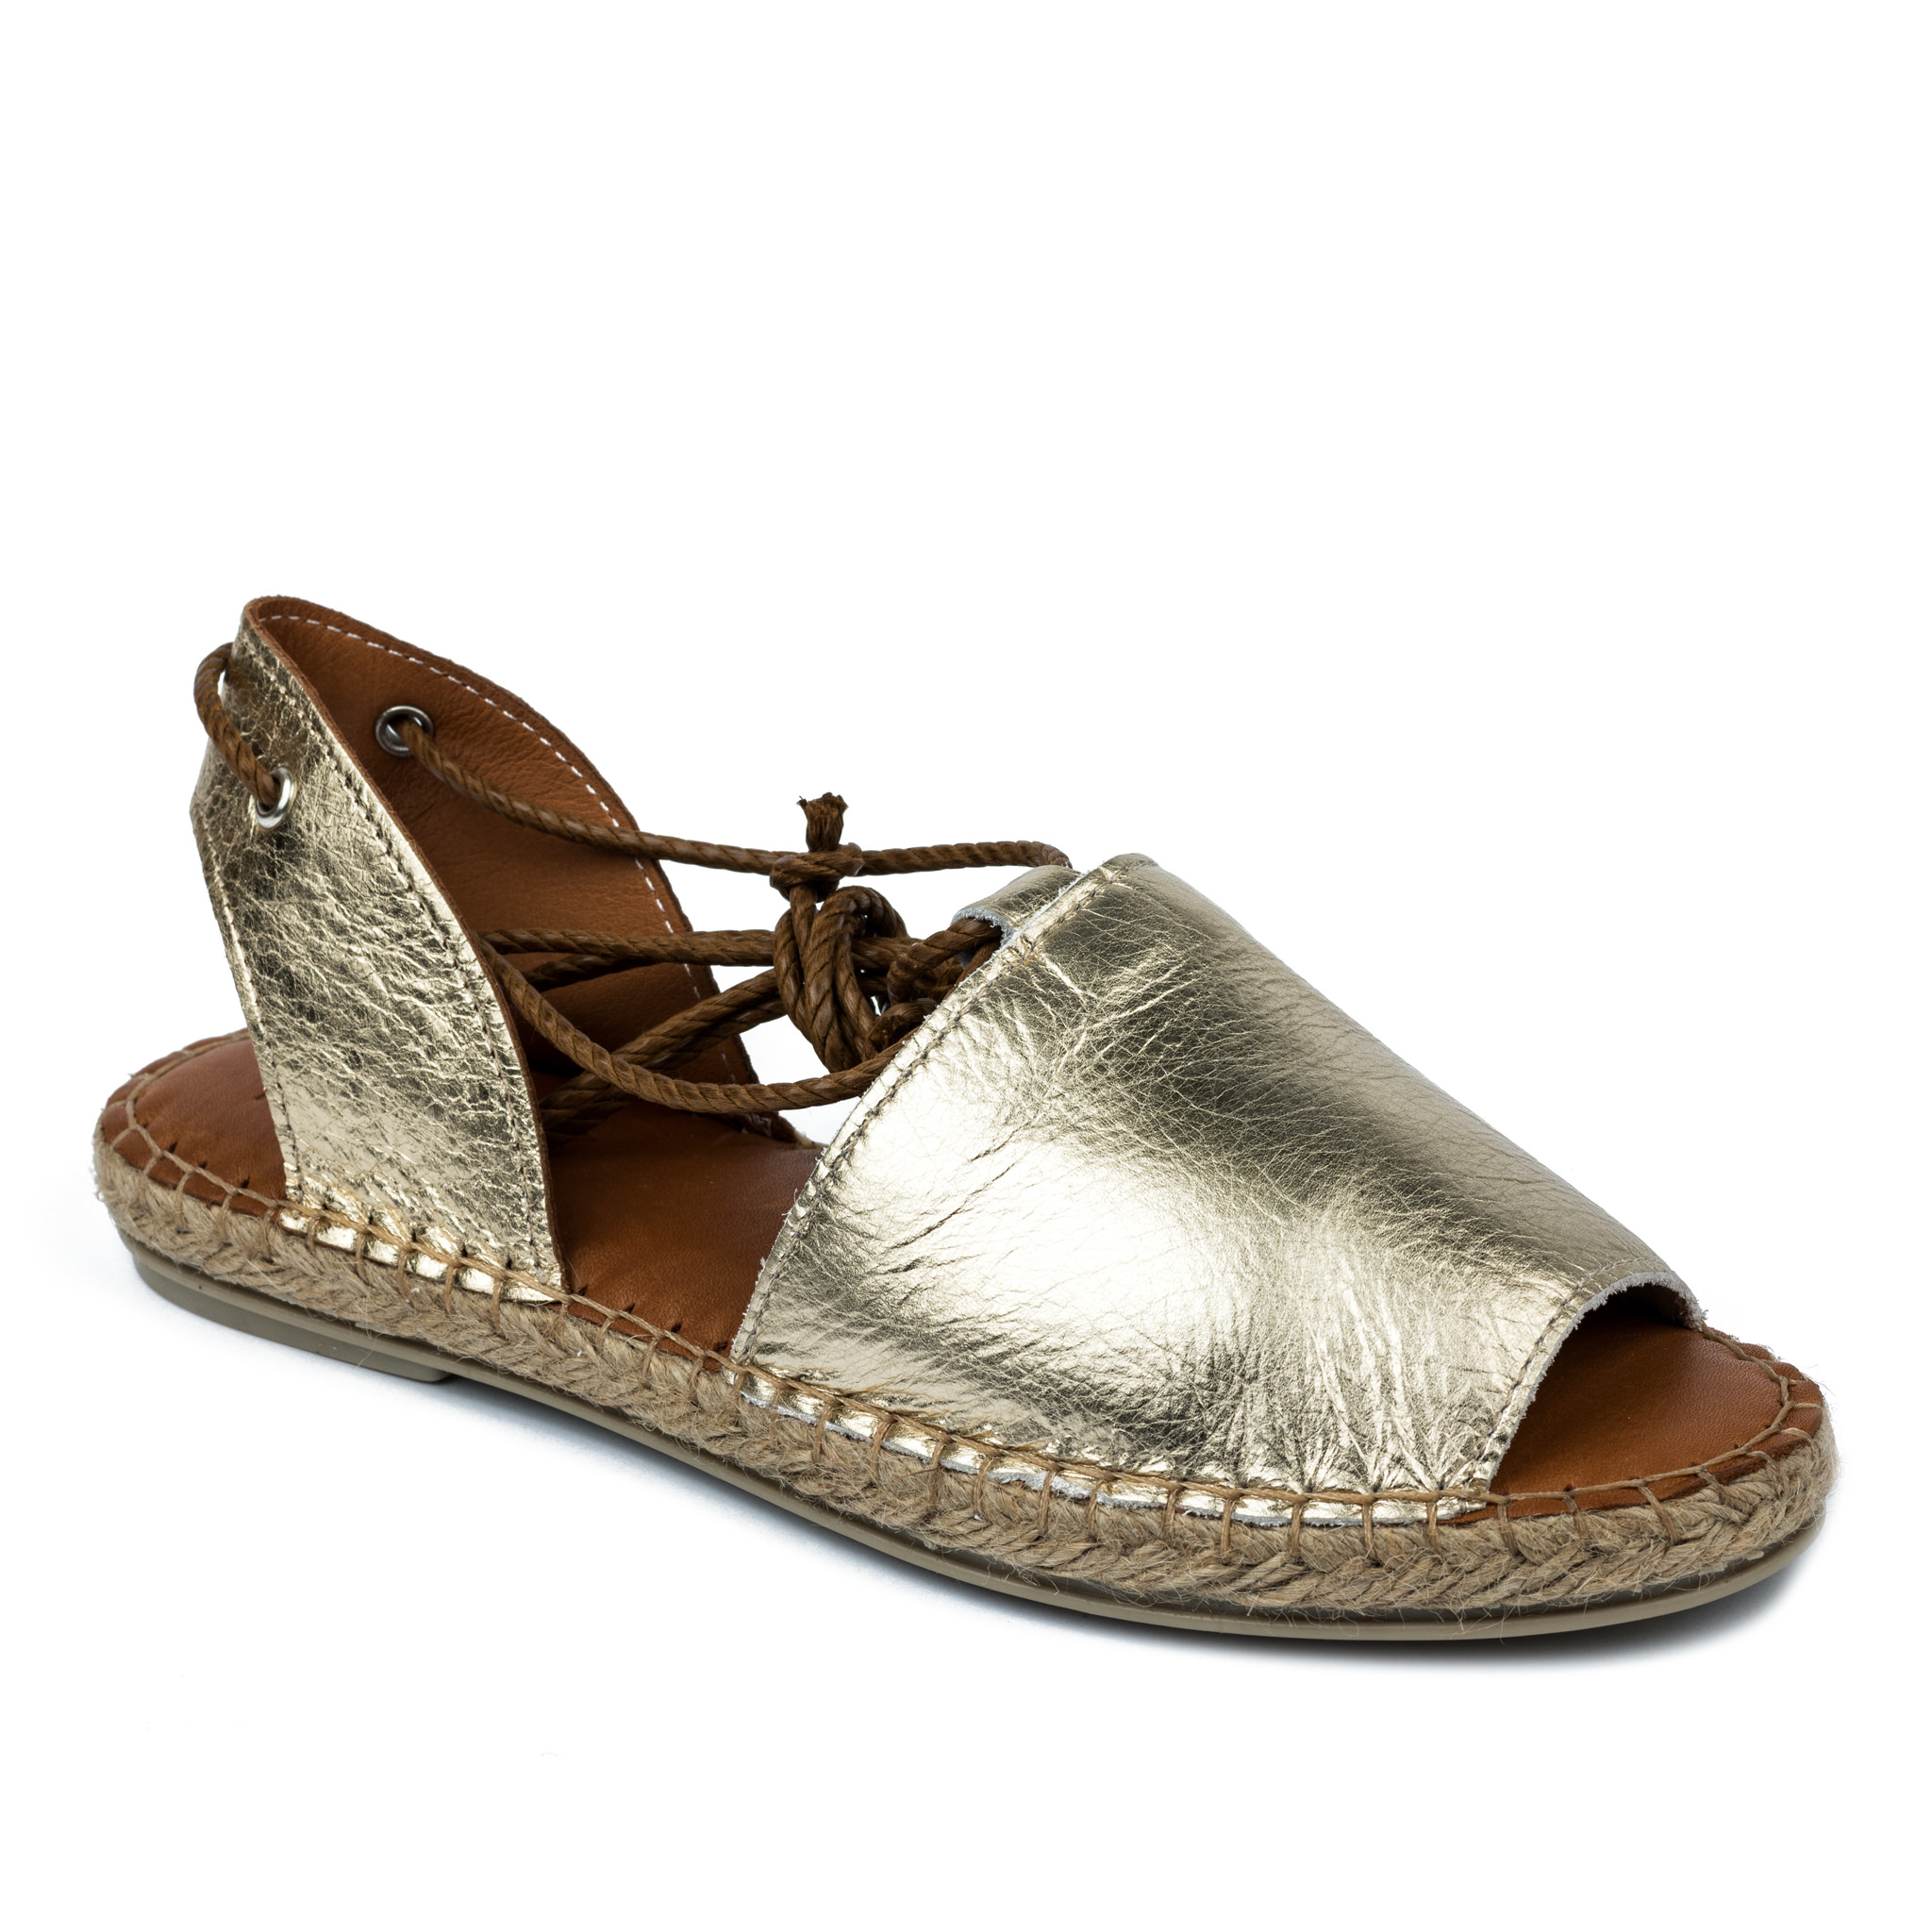 Leather espadrilles A585 - GOLD